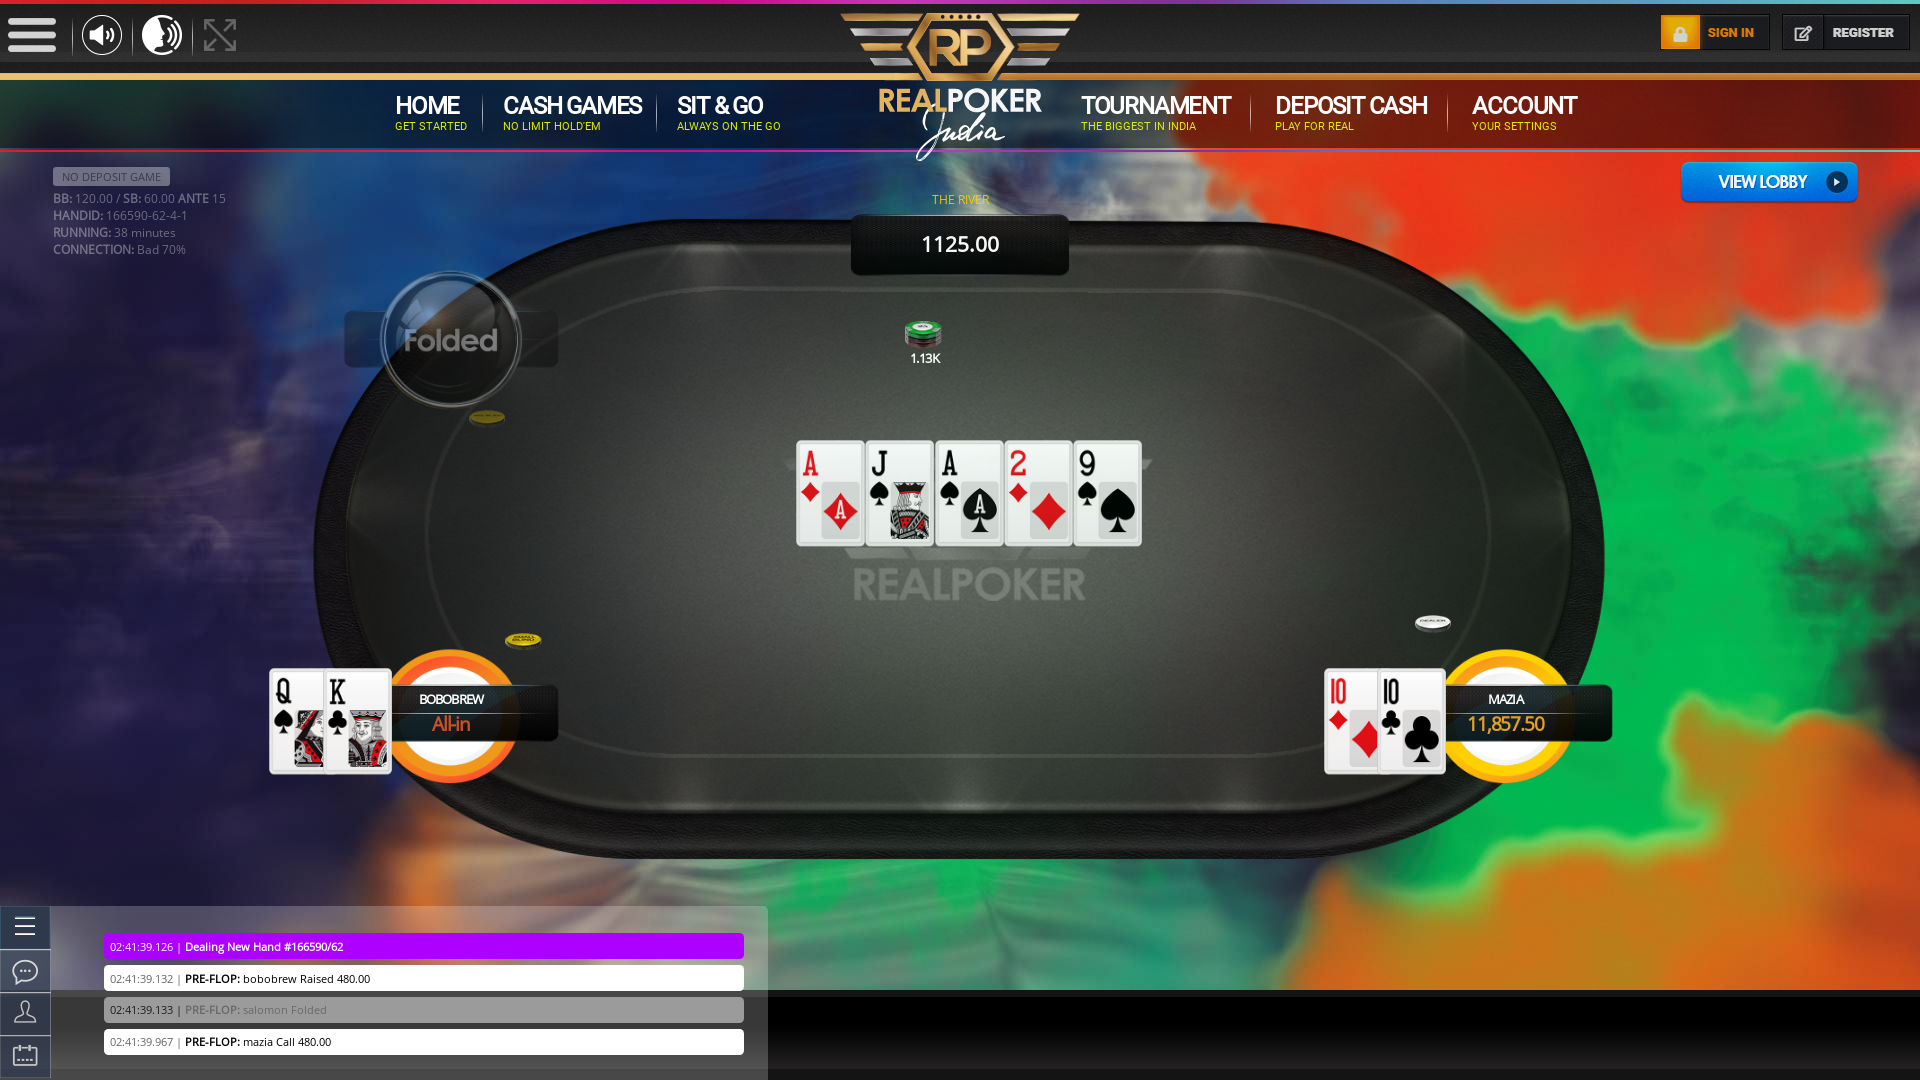 Real poker 10 player table in the 38th minute of the match